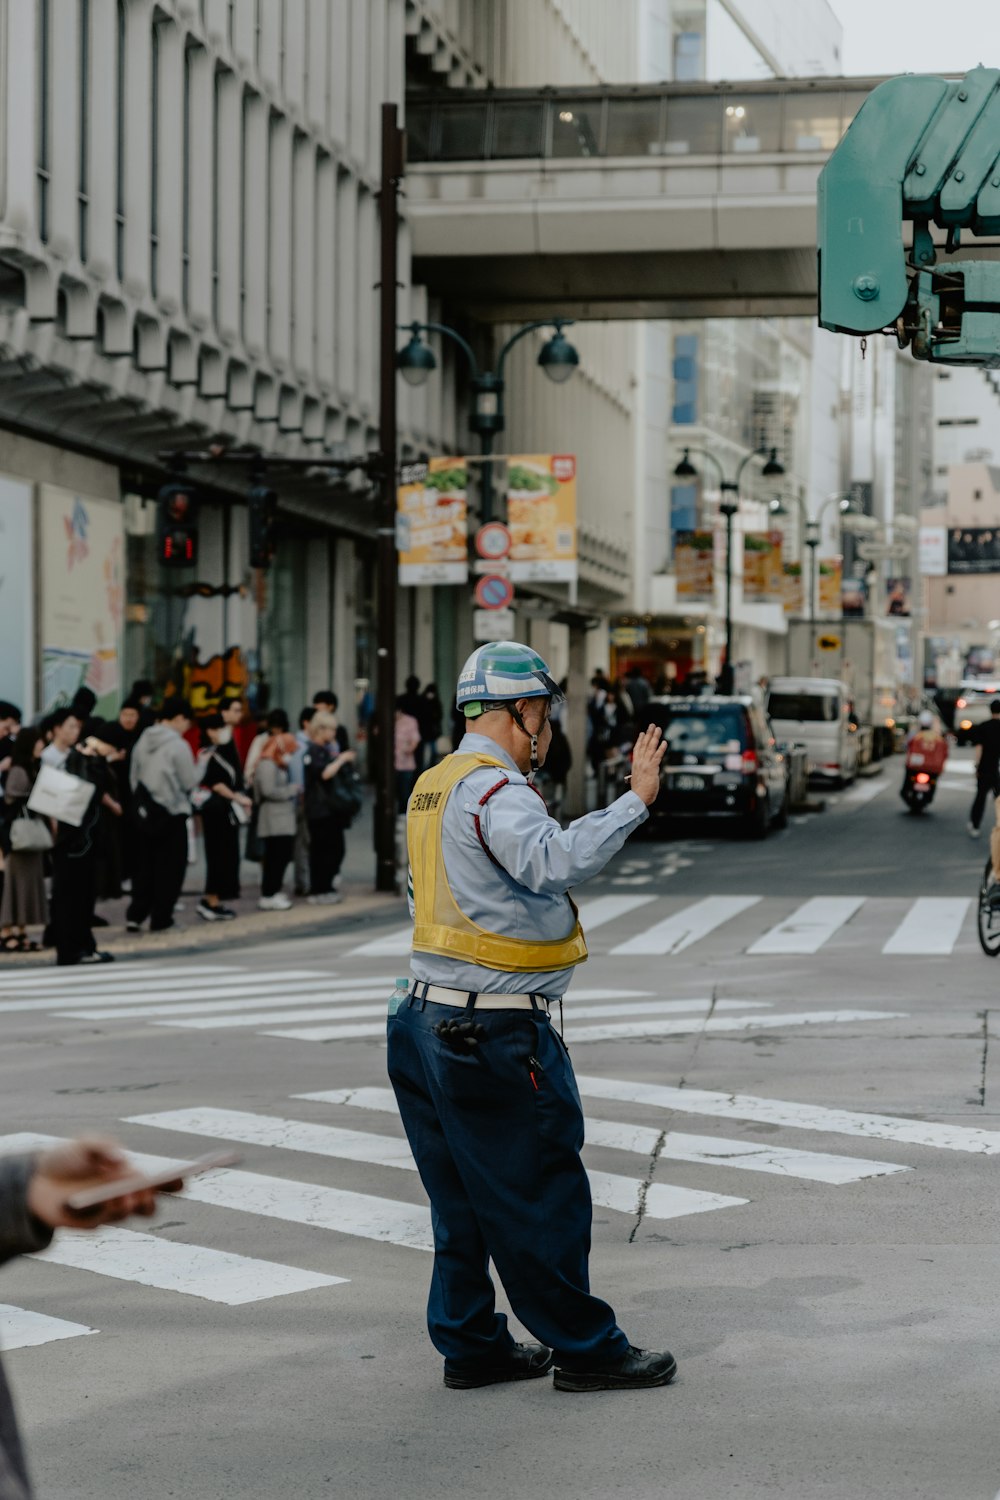 a police officer directing traffic on a busy city street